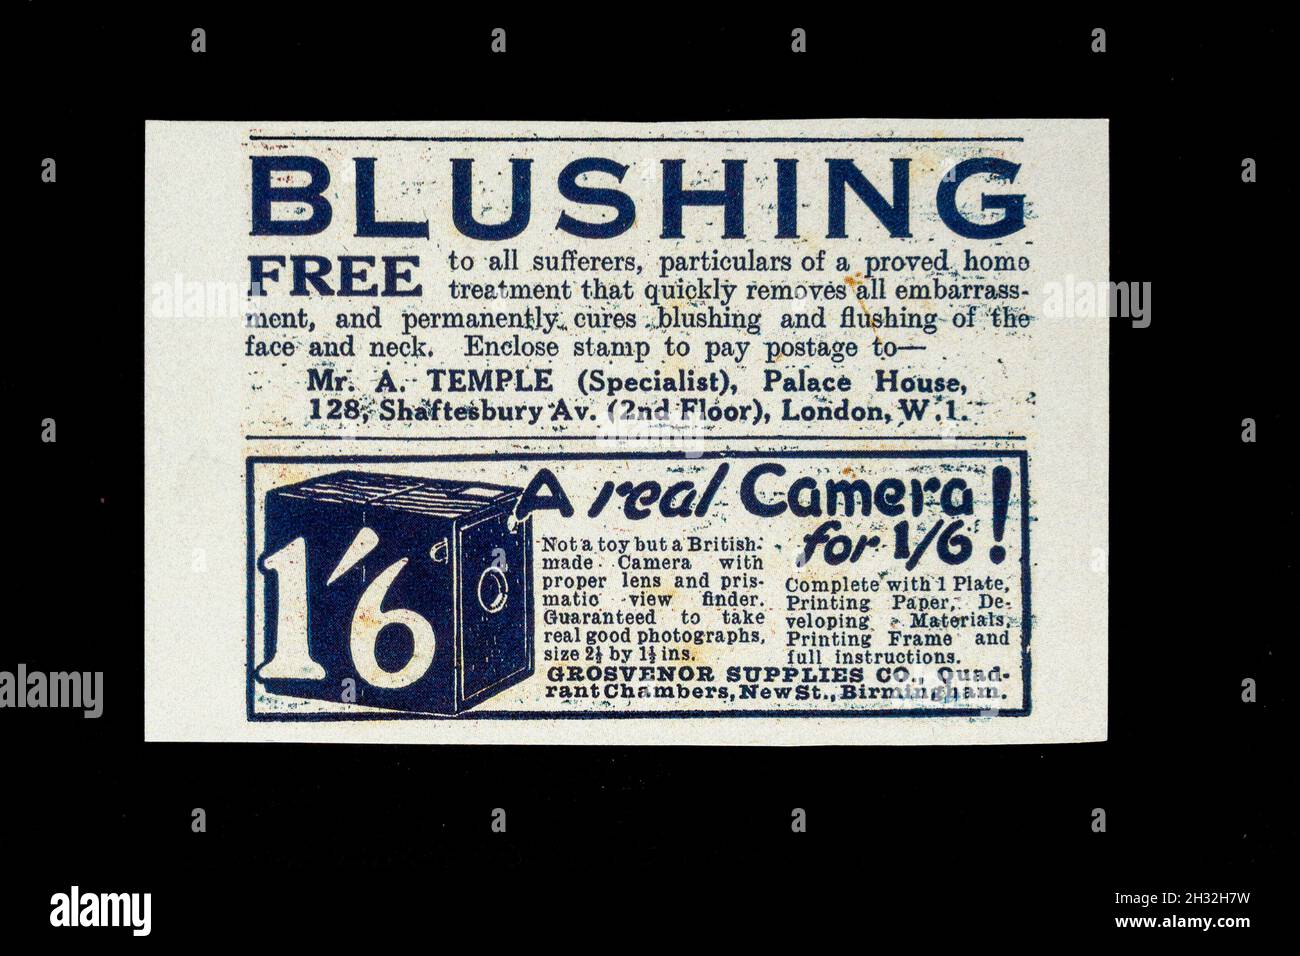 Advert (replica) for a home treatment to cure blushing and a box camera from the 1920's. Stock Photo